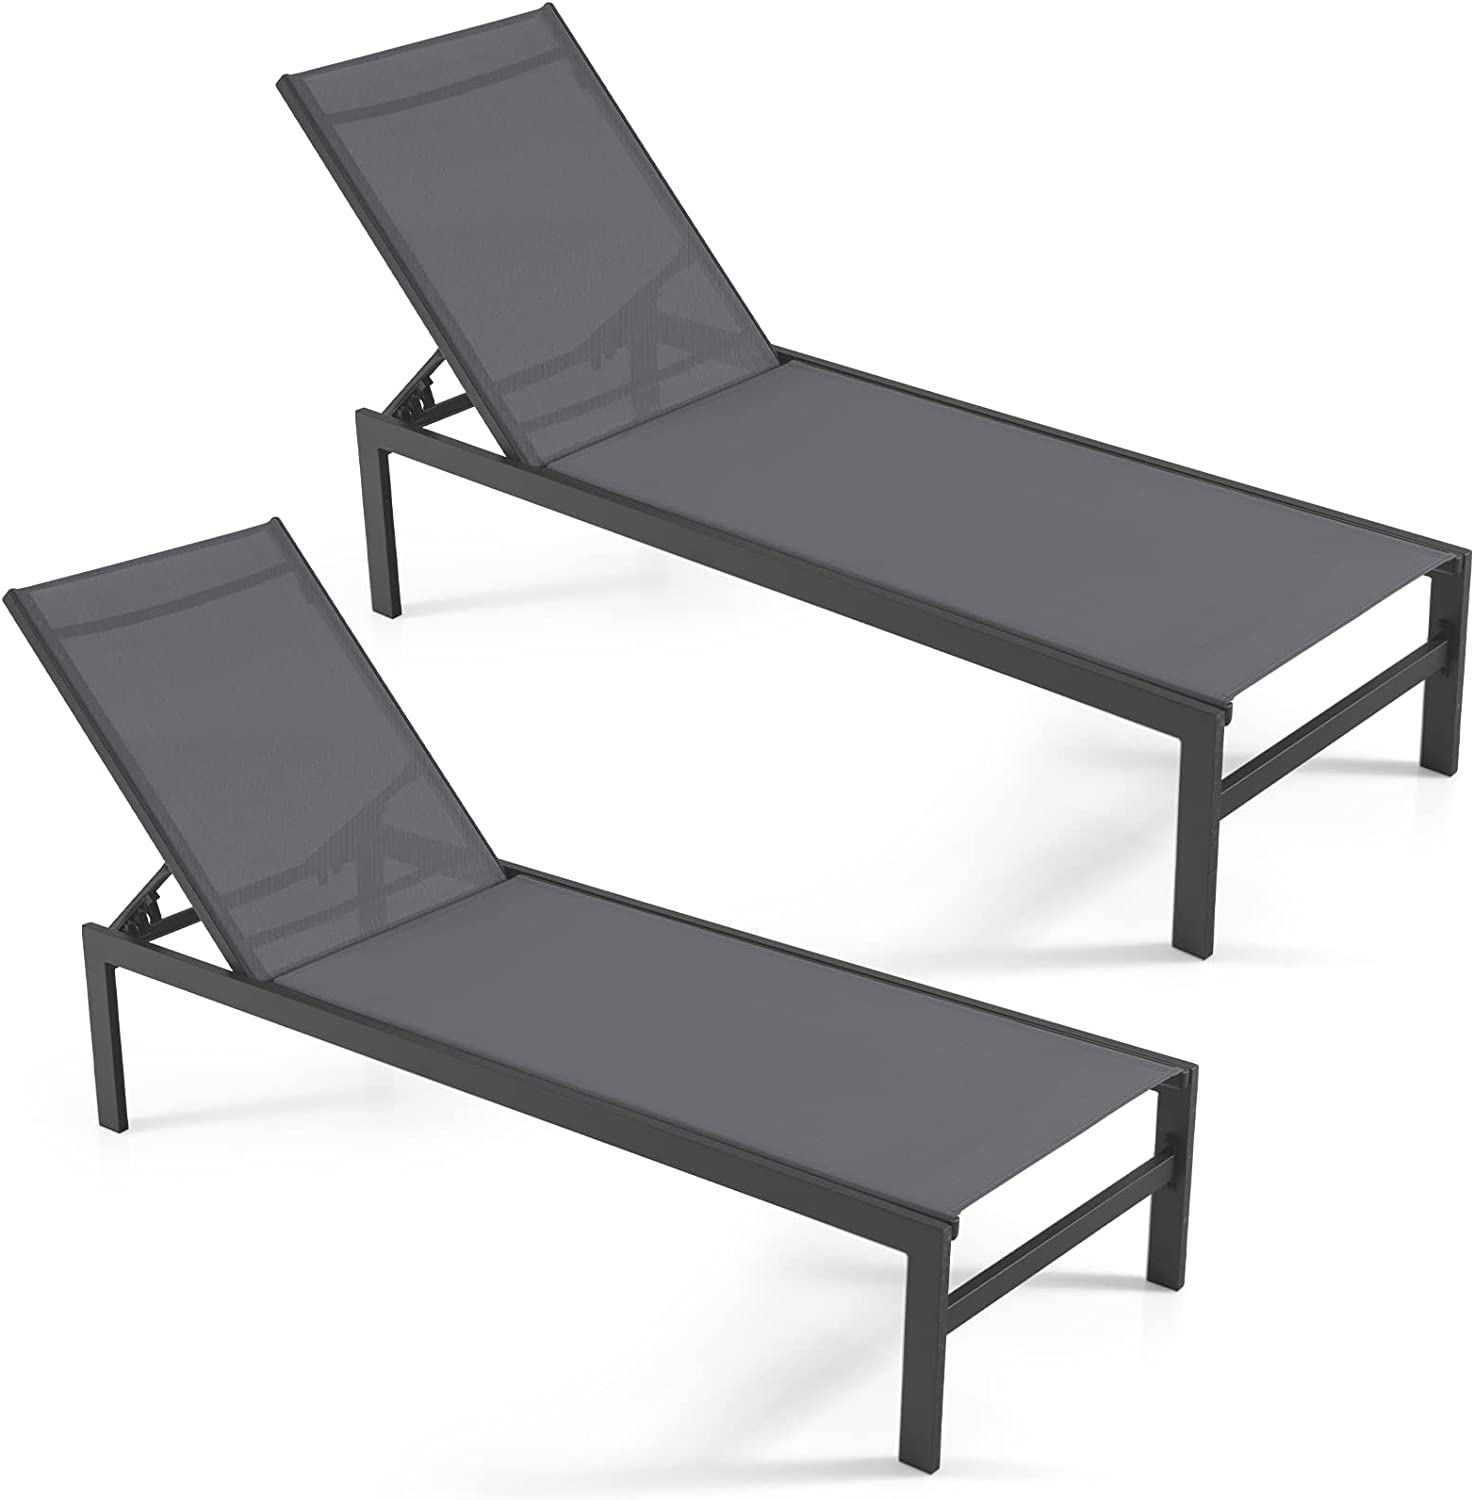 Giantex Patio Chaise Lounge Chair, Outdoor Sunbathing Chair Lawn Reclining Lounger with 6 Adjustable Position